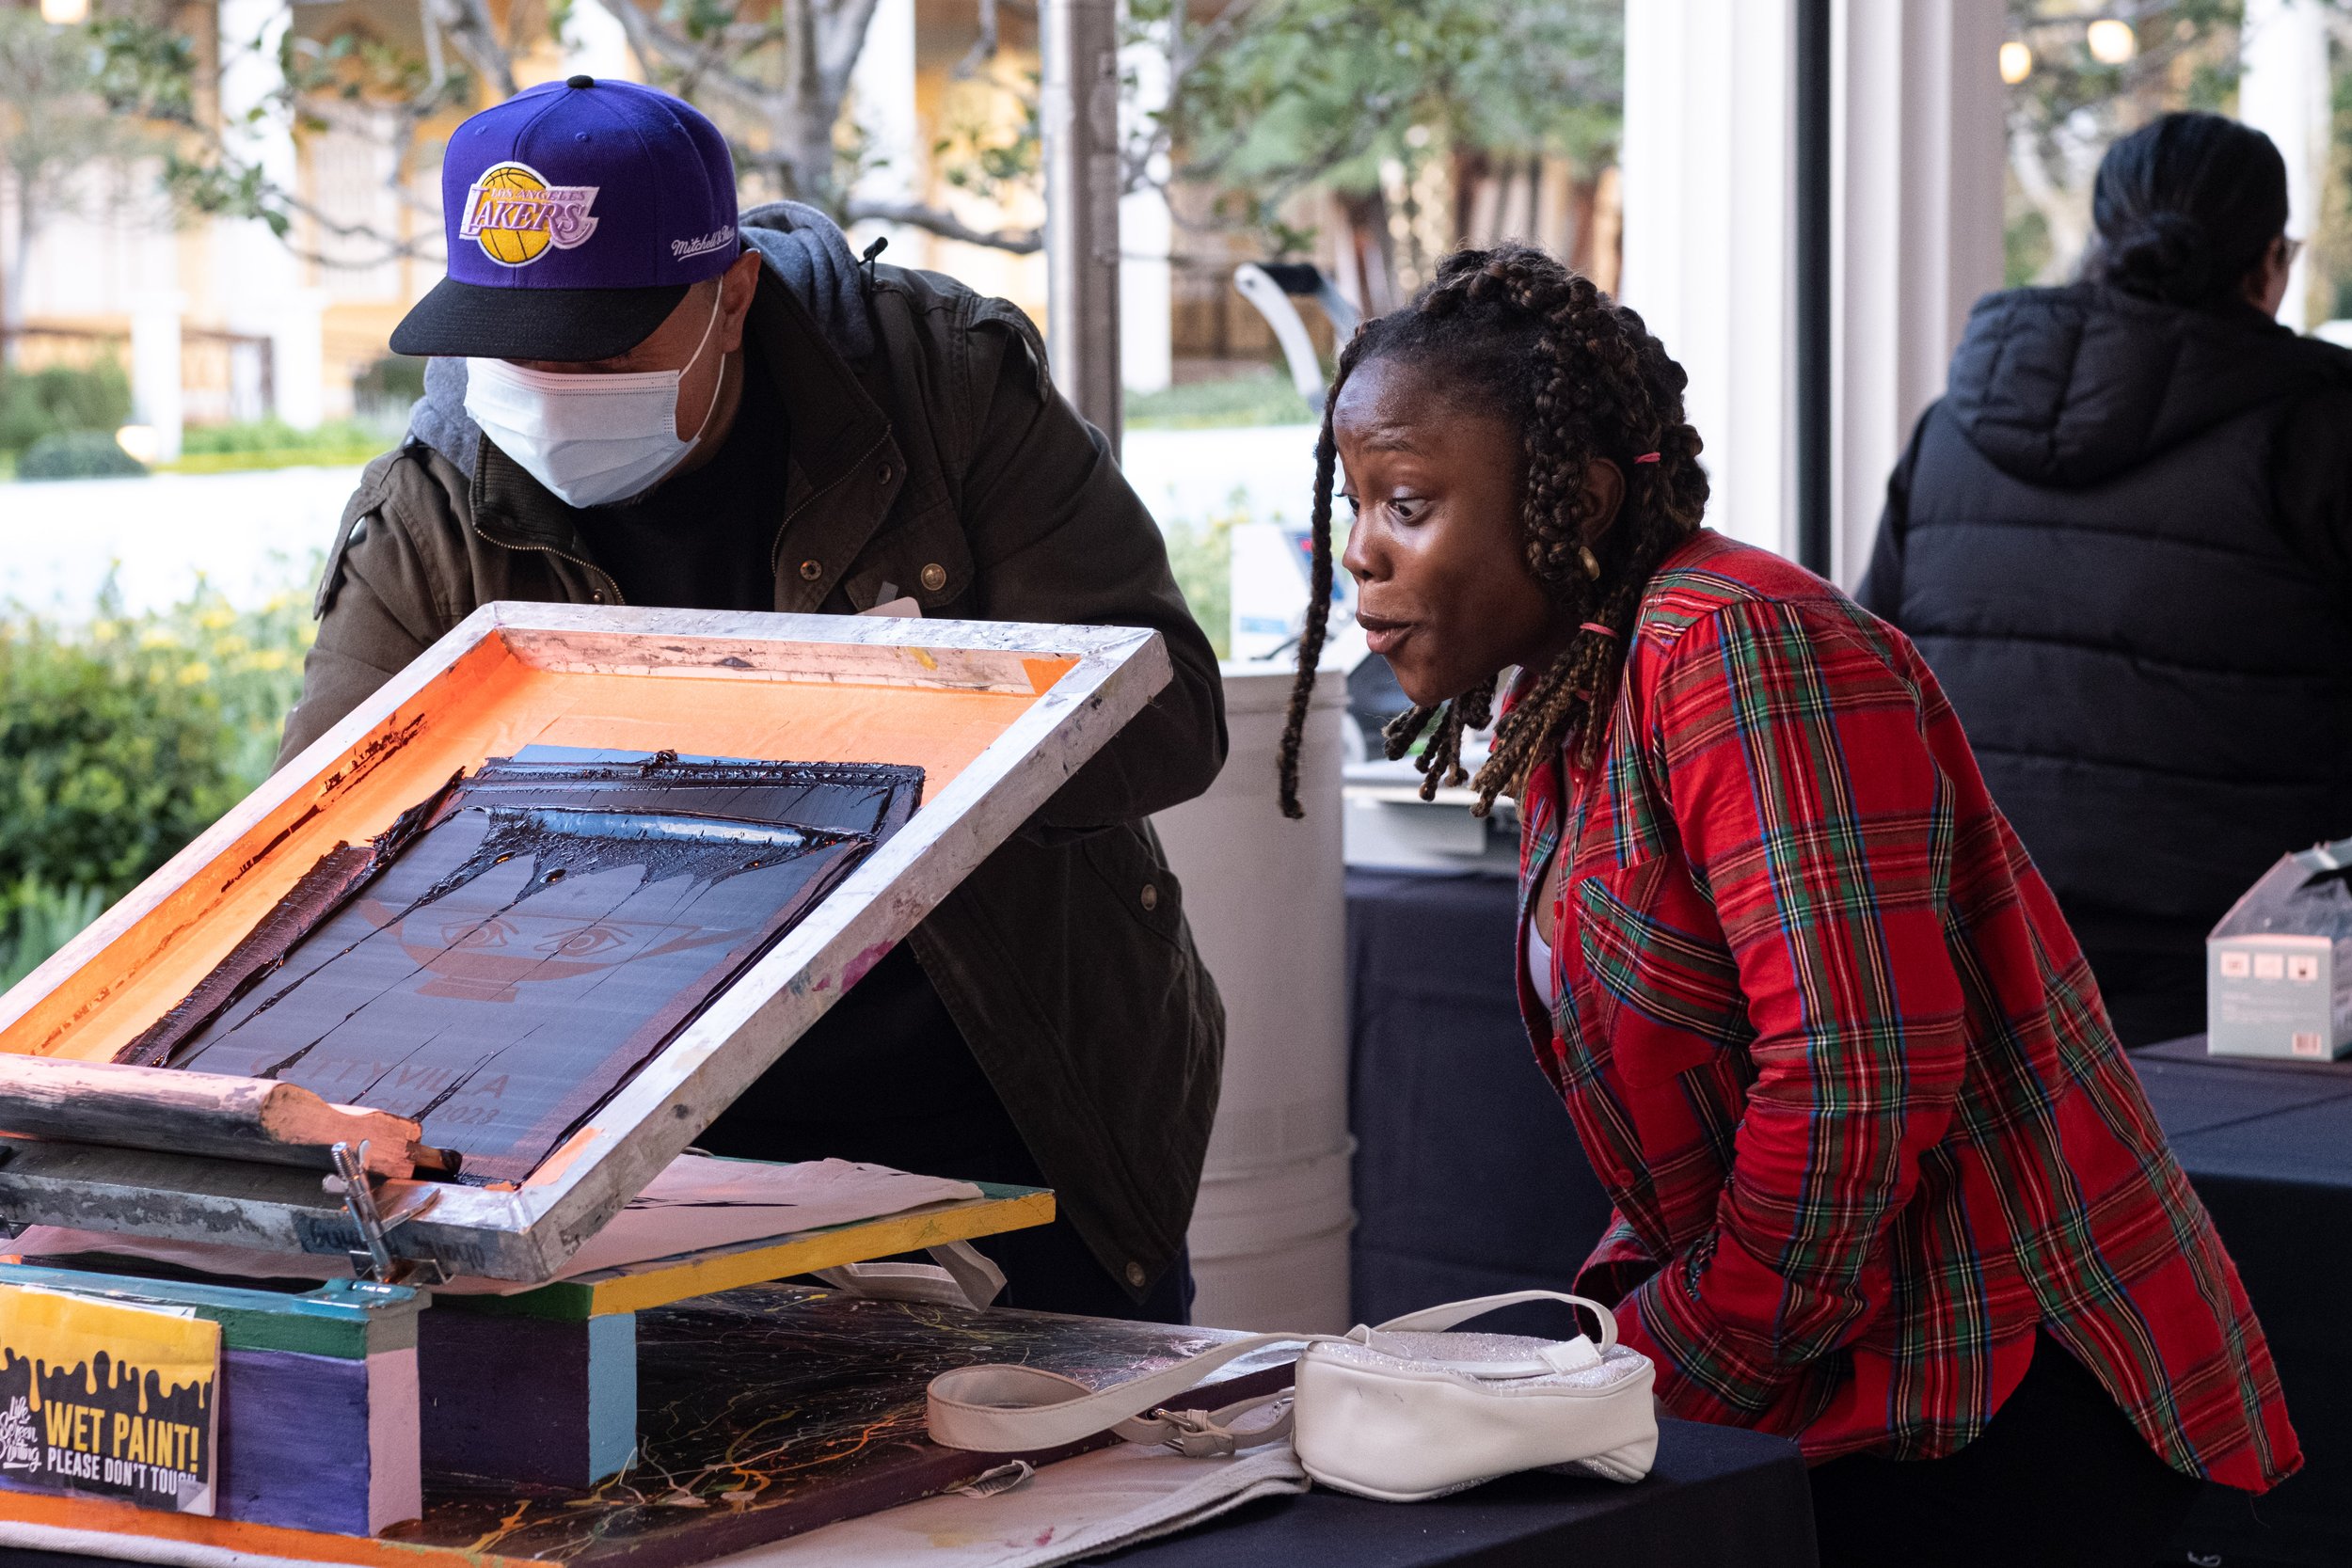  Daniella Pat-Onuoha, Biochemistry and Molecular Biology major at California Lutheran University gets to see the image she has just silk screened onto a tote bag at College Night on Wednesday, March 22, 2023. at the Getty Villa Museum in Pacific Pali